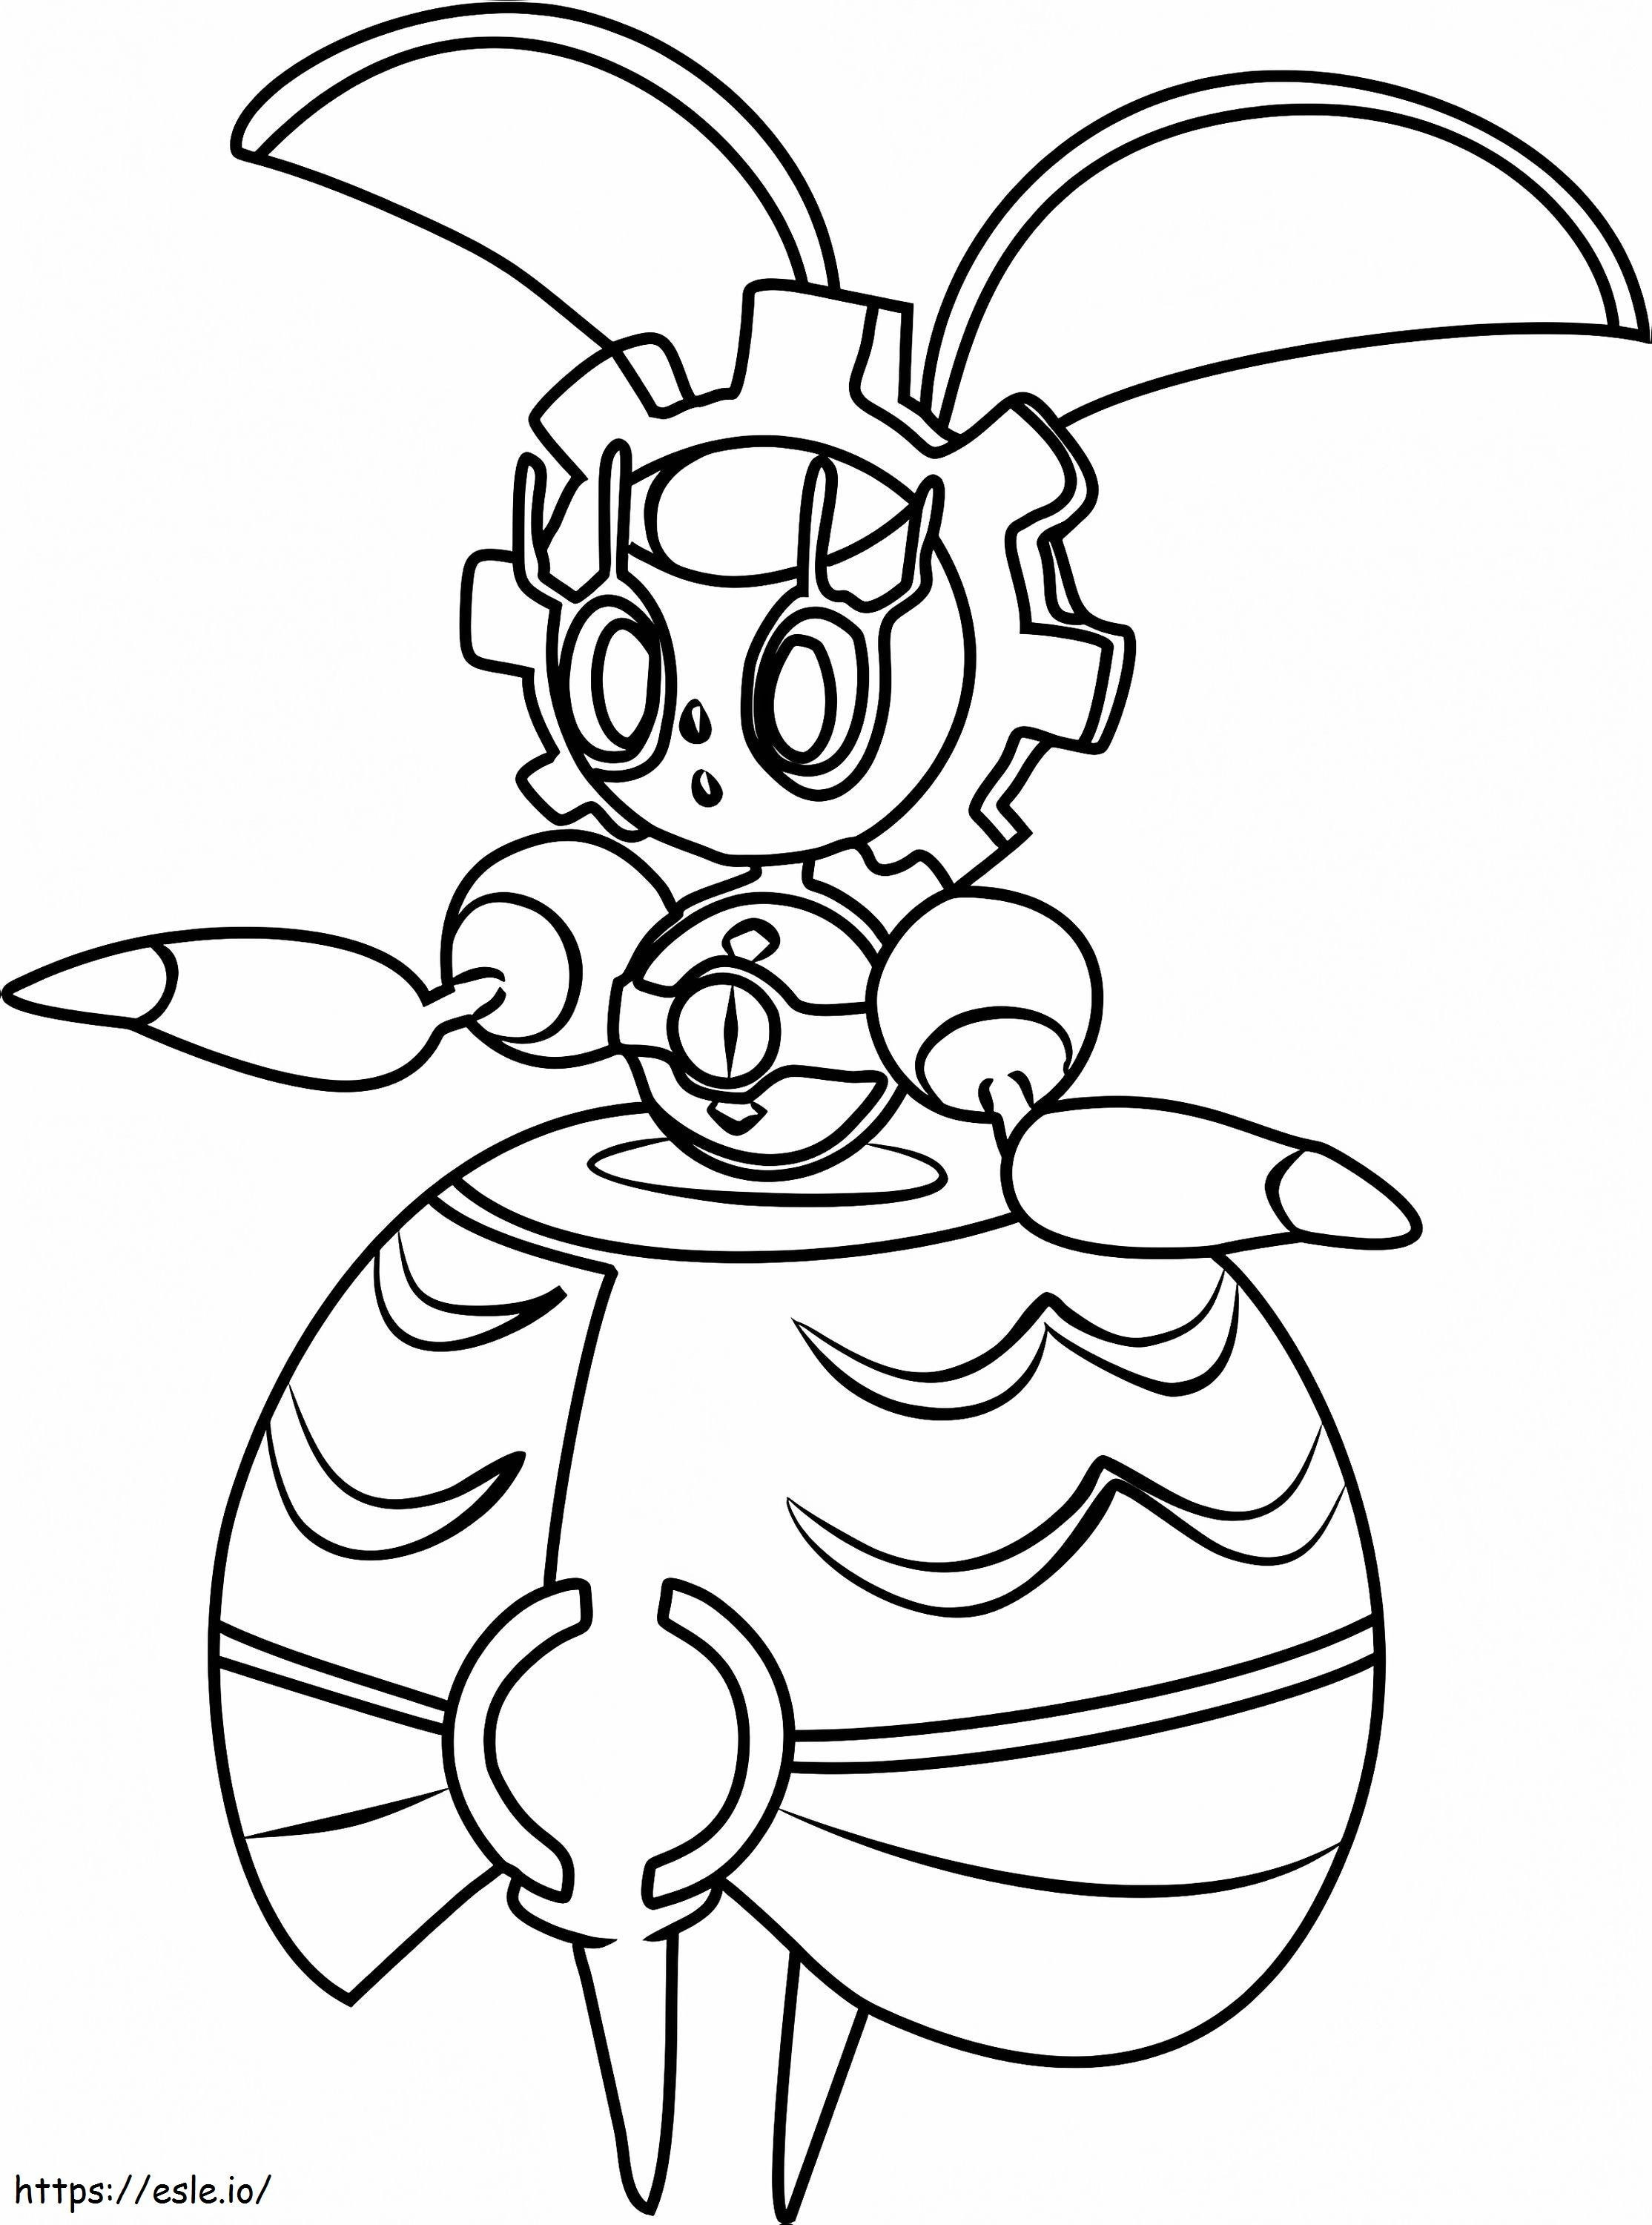 1529895445 14 coloring page